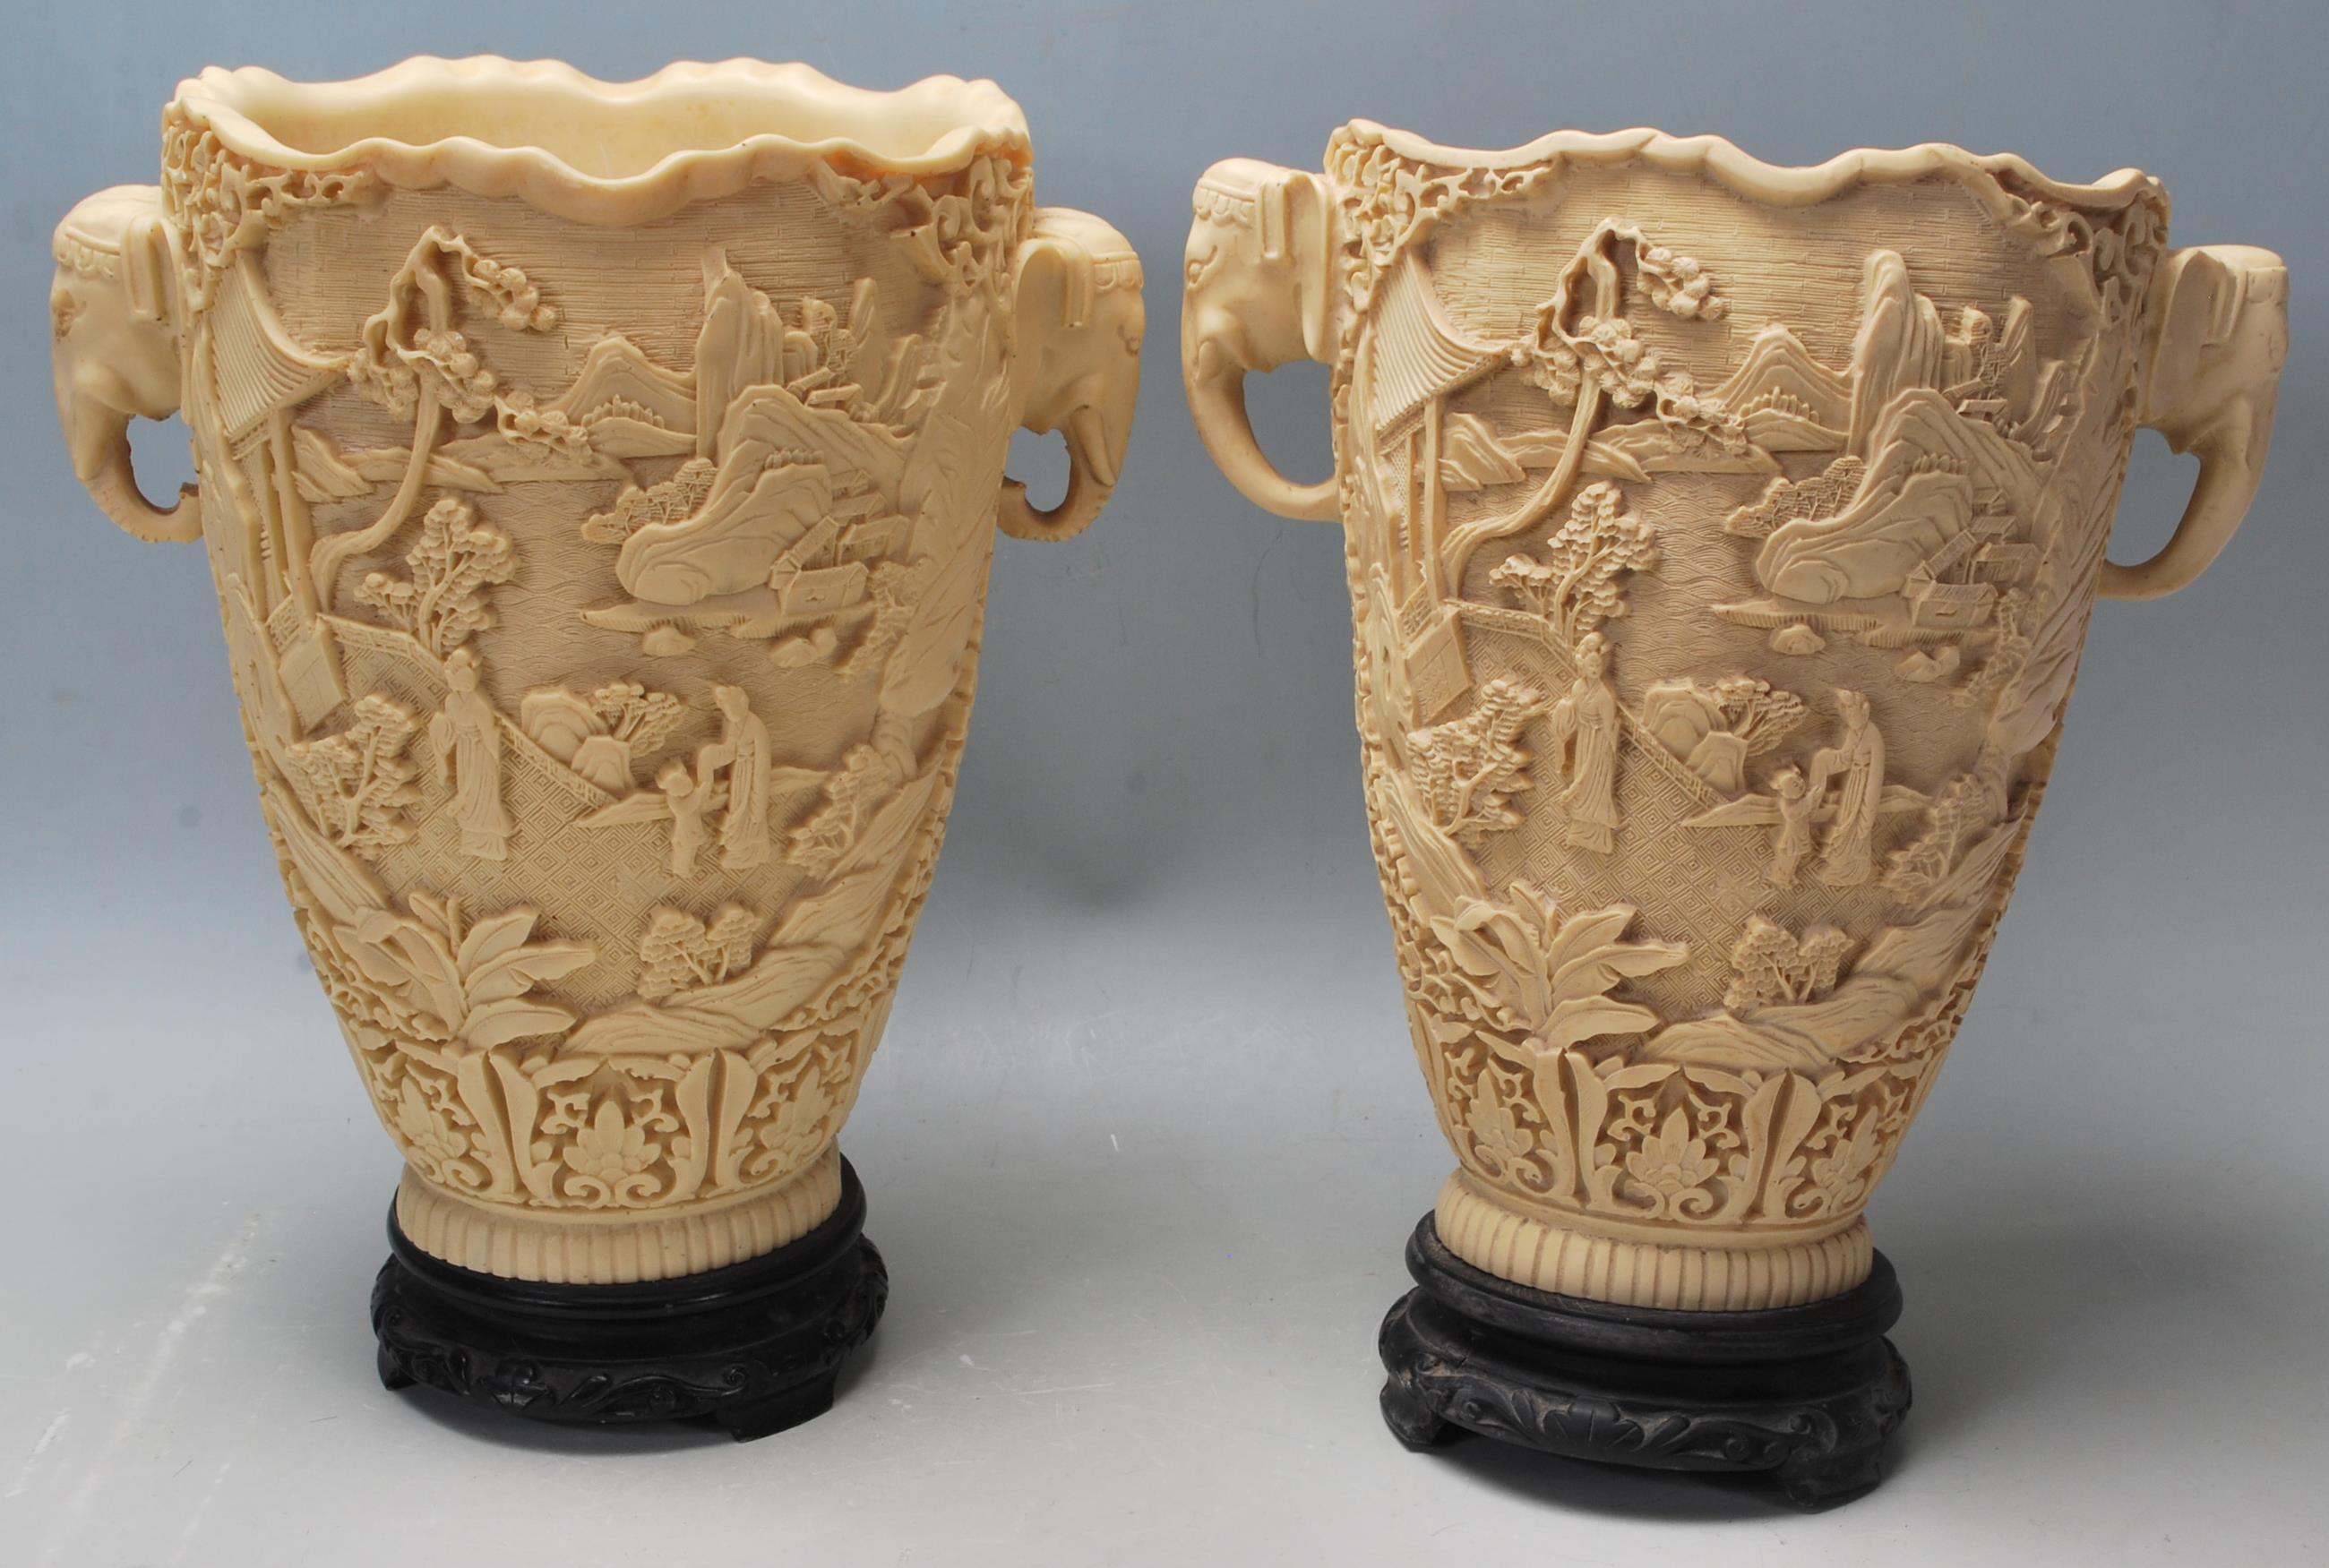 A pair of early 20th Century Chinese resin vases h